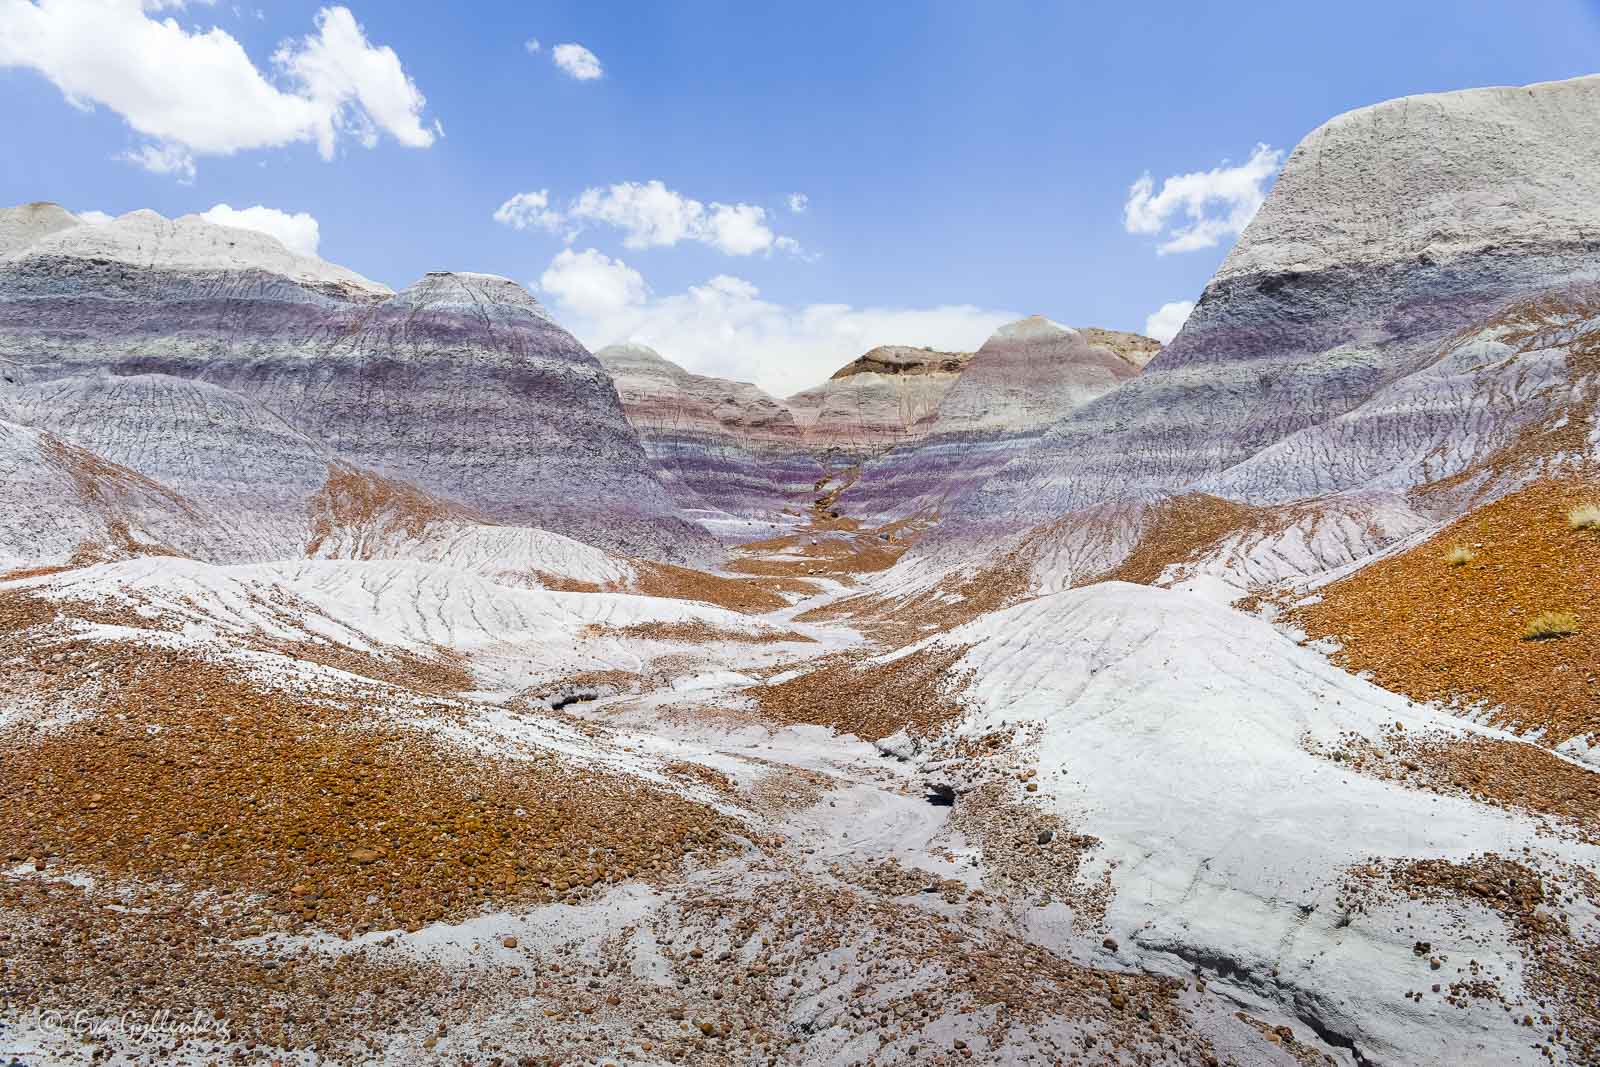 White and striped hills in the Petrified Forest